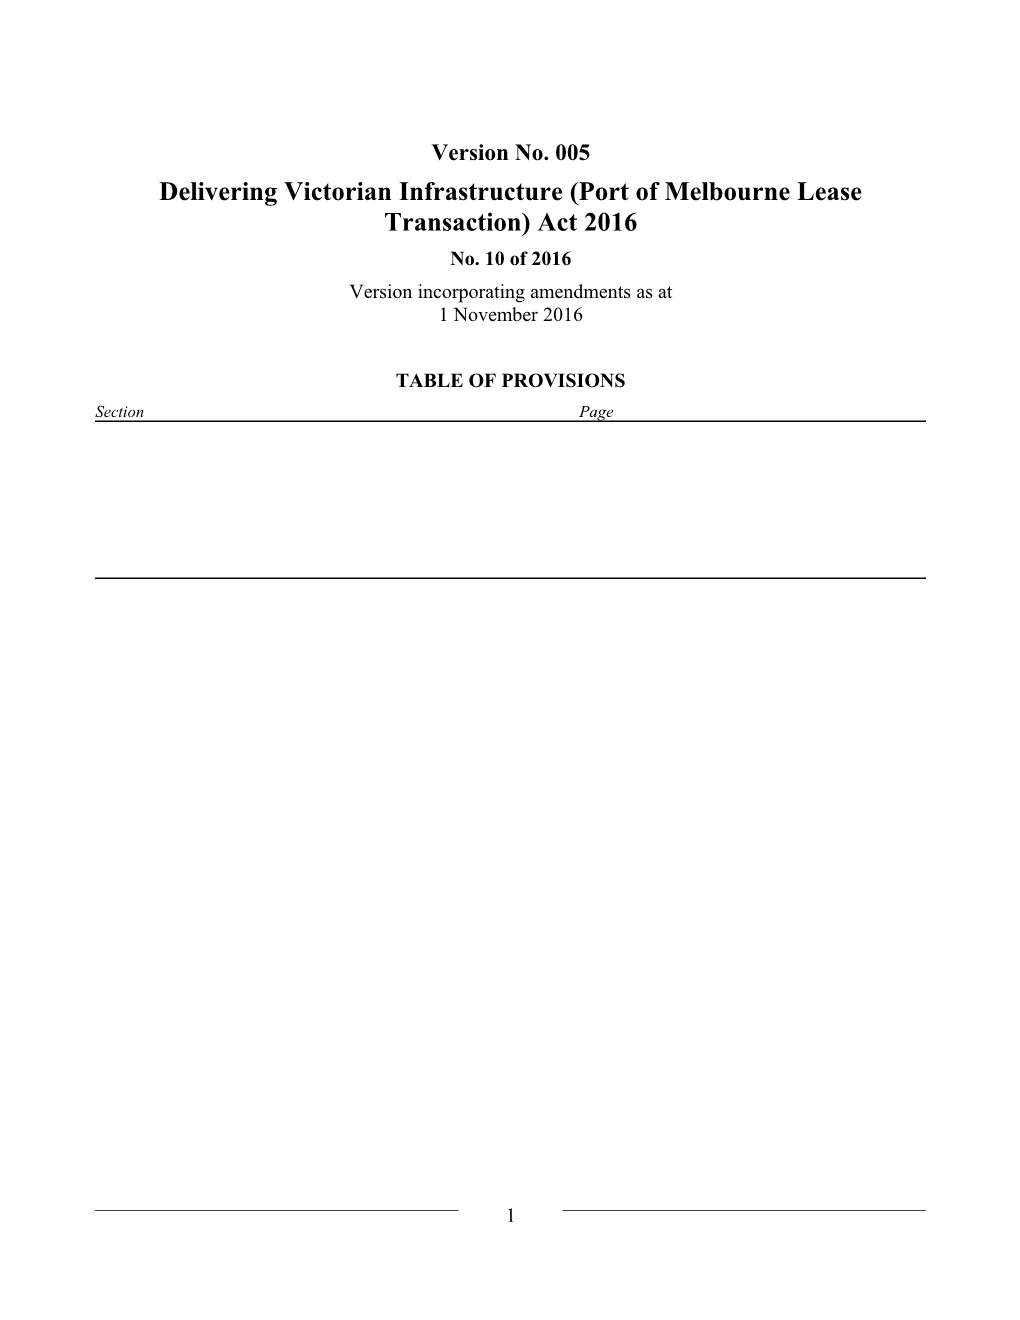 Delivering Victorian Infrastructure (Port of Melbourne Lease Transaction) Act 2016